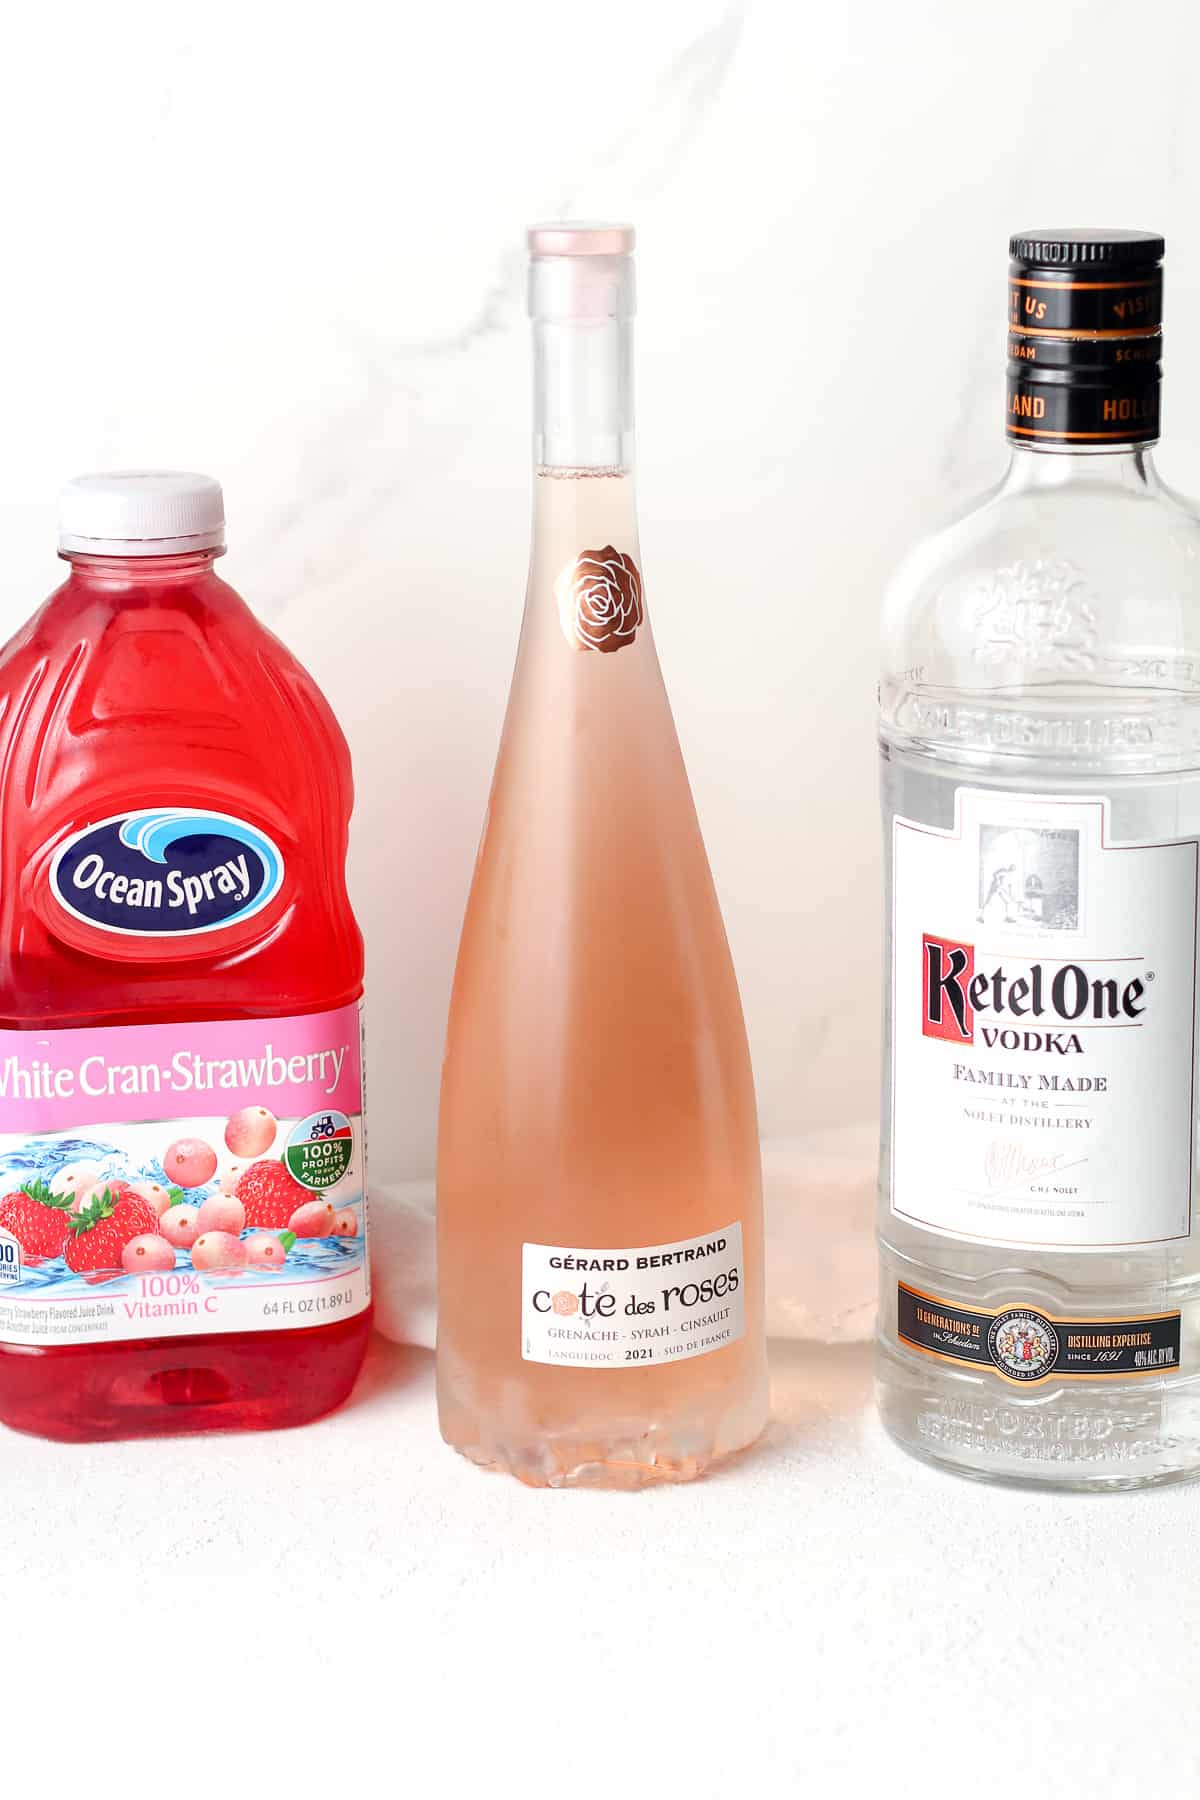 A bottle of Cranberry-strawberry juice, rose wine, and vodka.